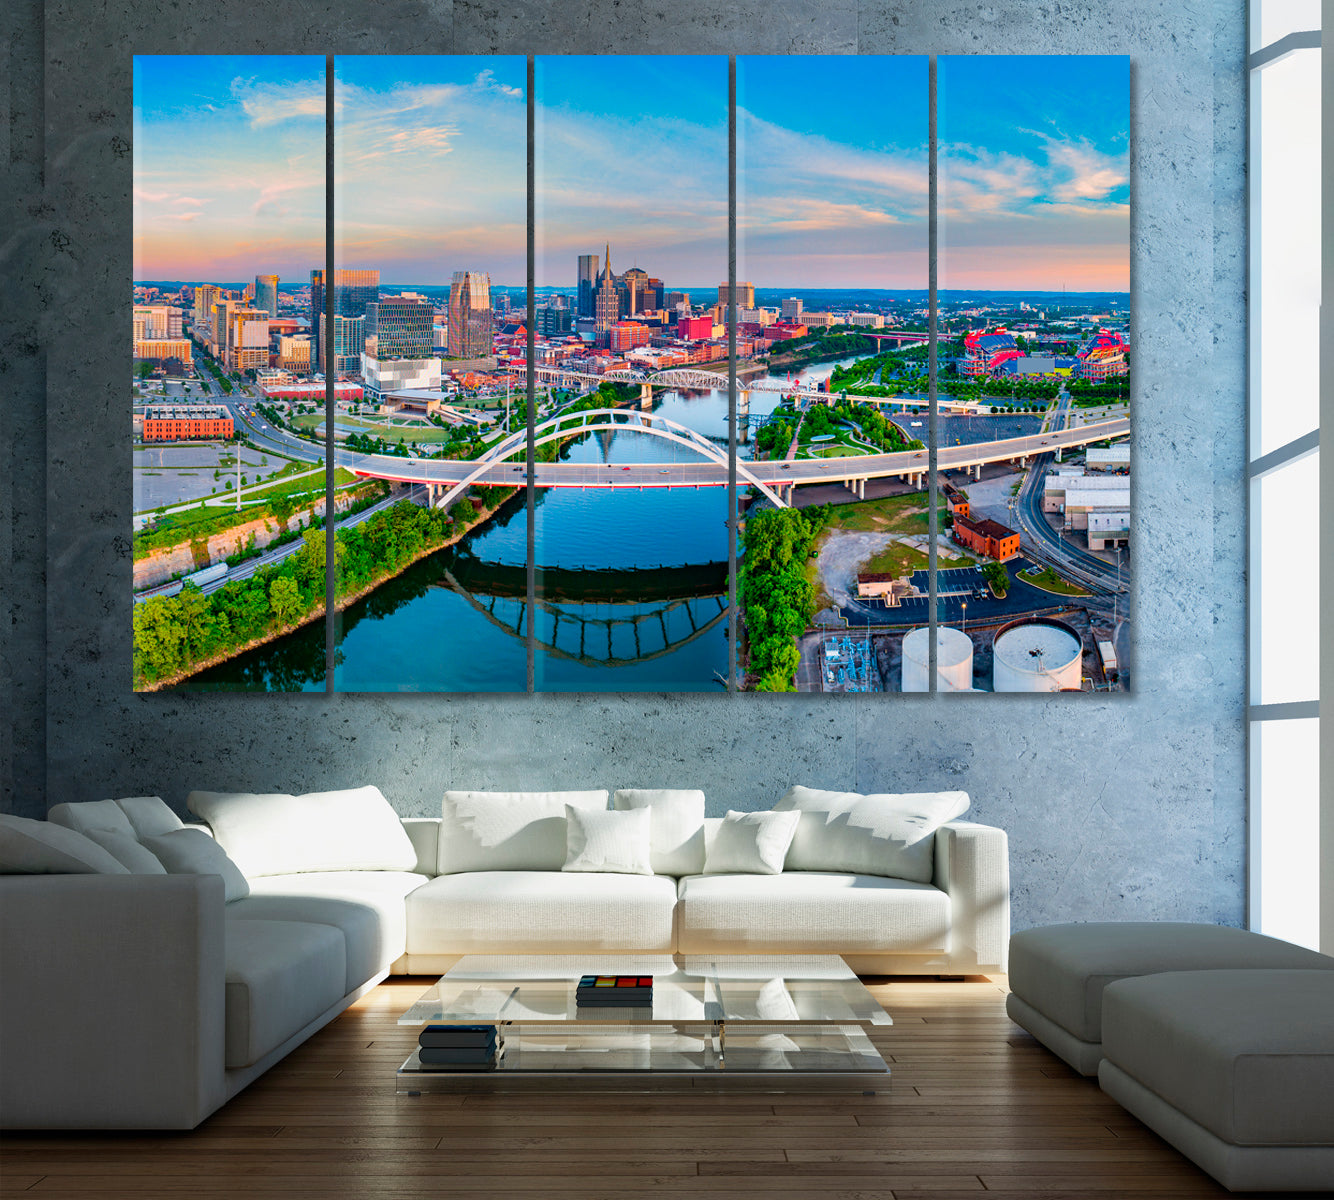 Downtown Nashville, Tennessee Cityscape Canvas Print ArtLexy 5 Panels 36"x24" inches 